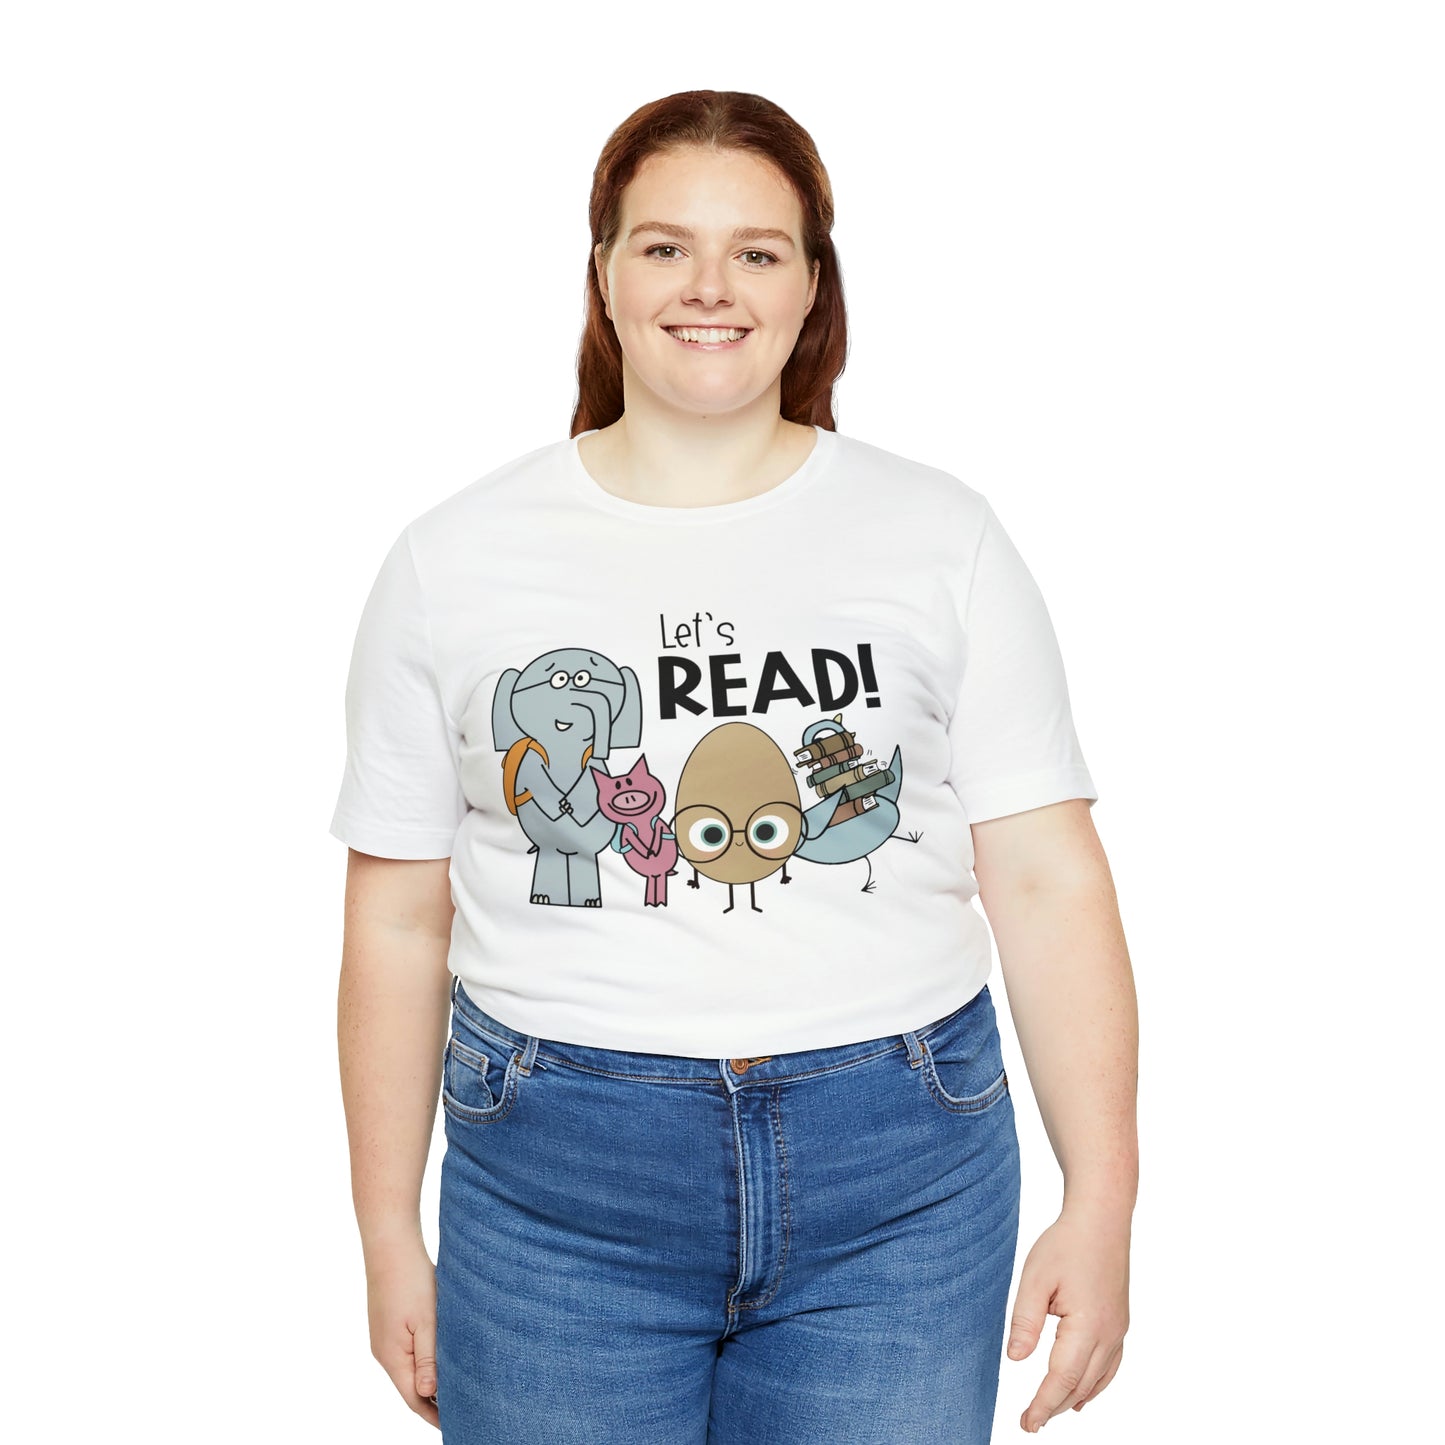 Lets Read Favorite picture book character teacher shirt Unisex Jersey Short Sleeve Tee